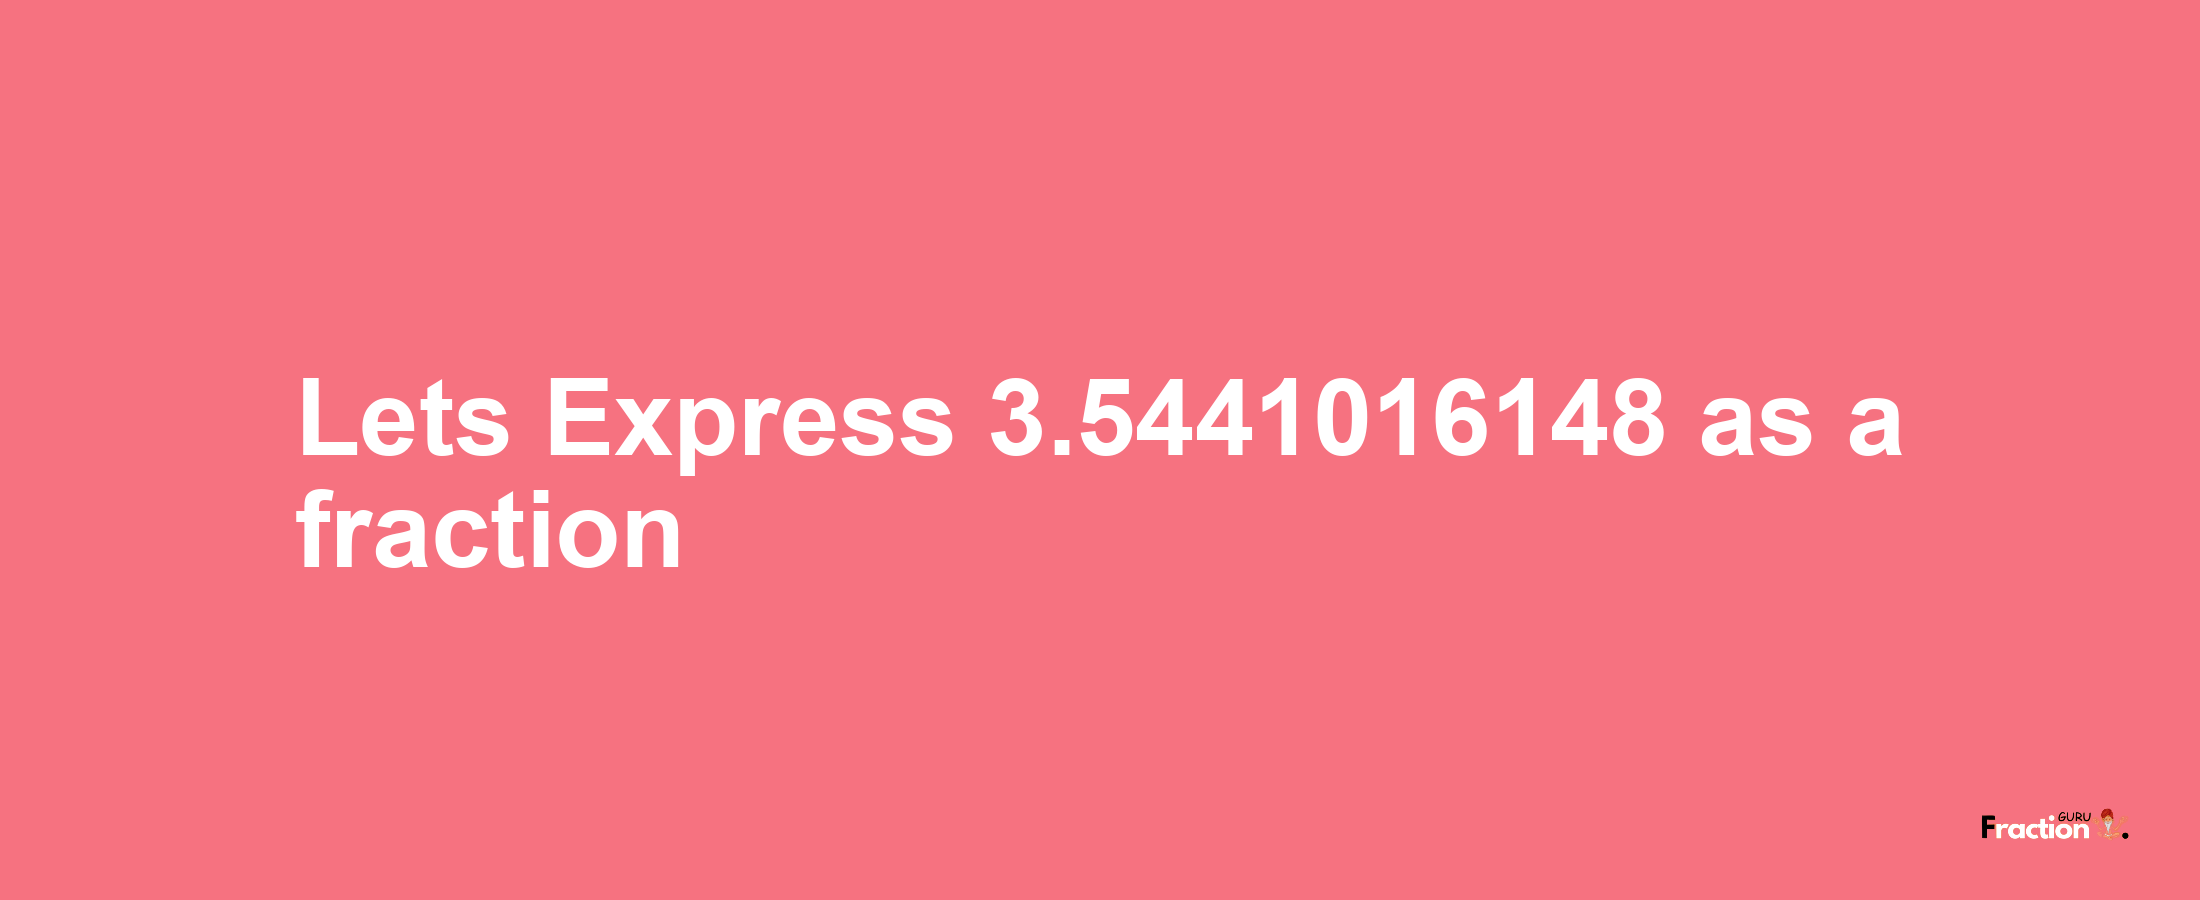 Lets Express 3.5441016148 as afraction